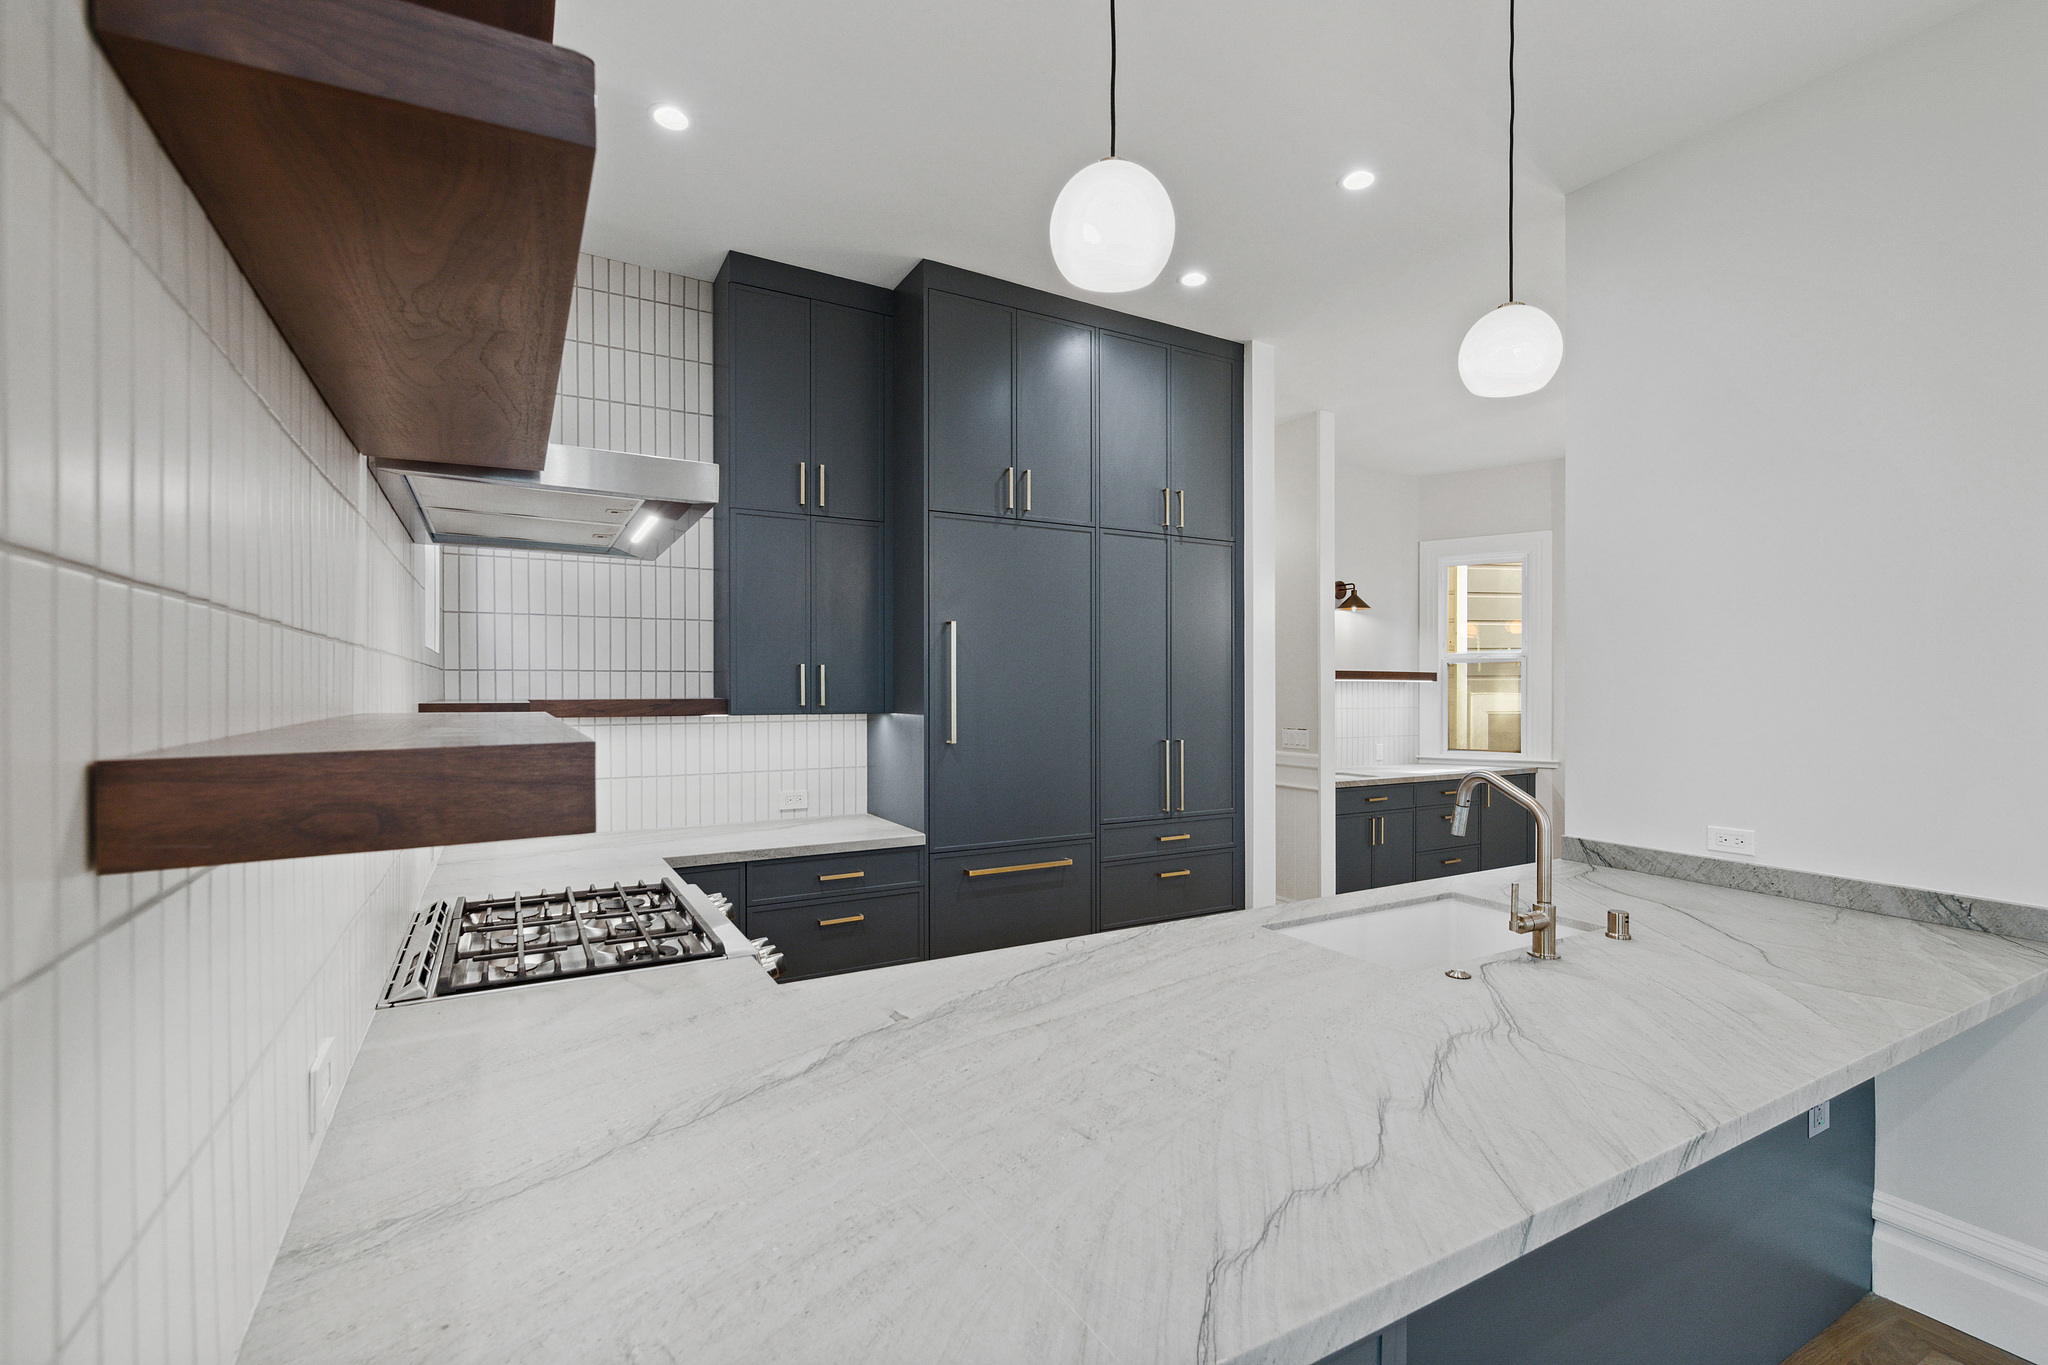 View of the Quartzite counters in a historic San Francisco home renovated by Centoni